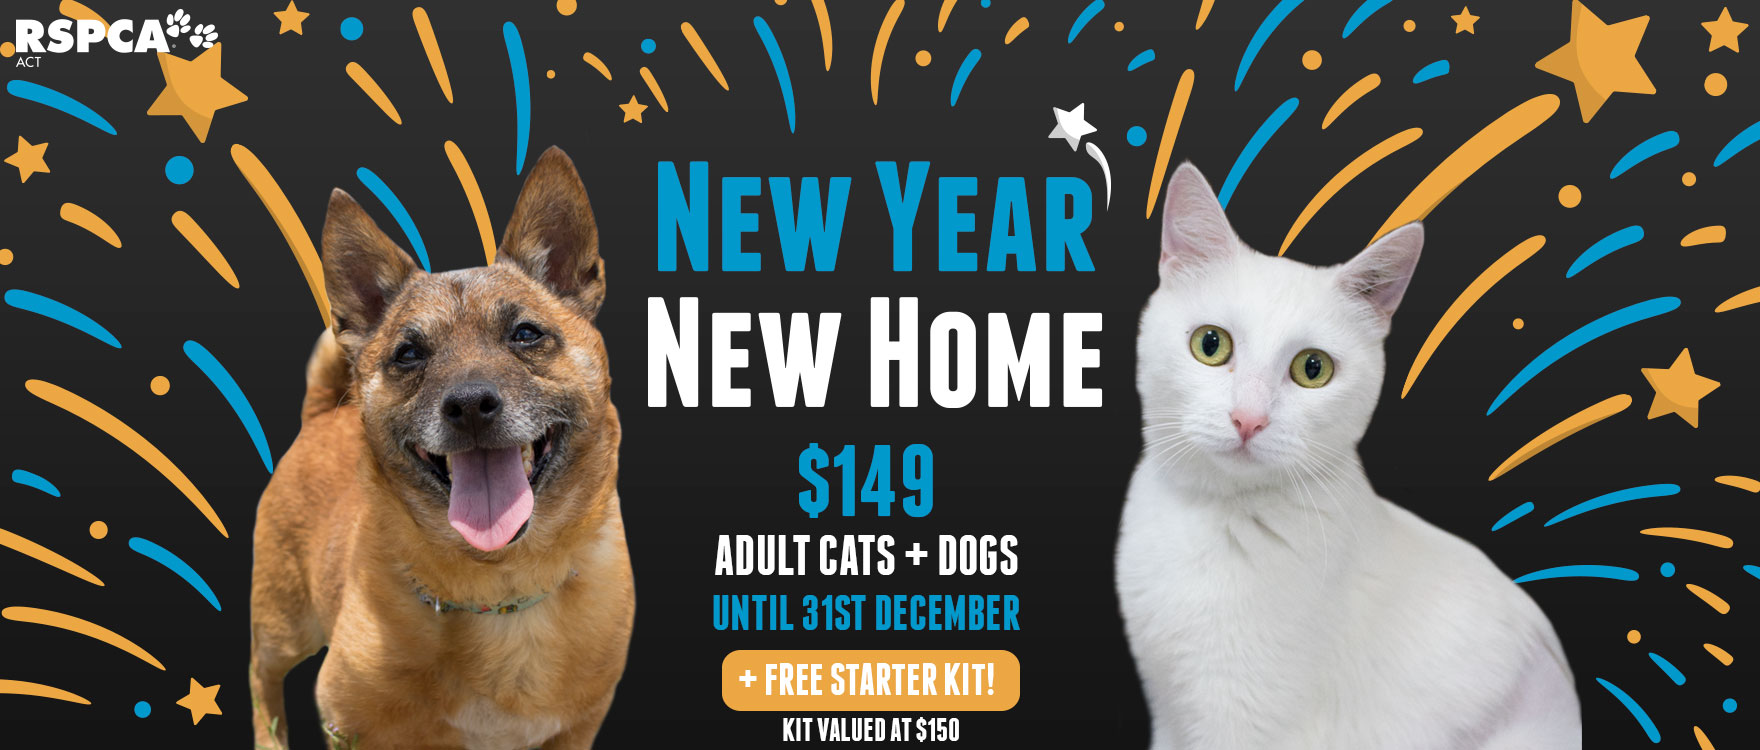 Help us find forever homes for our adult animals!